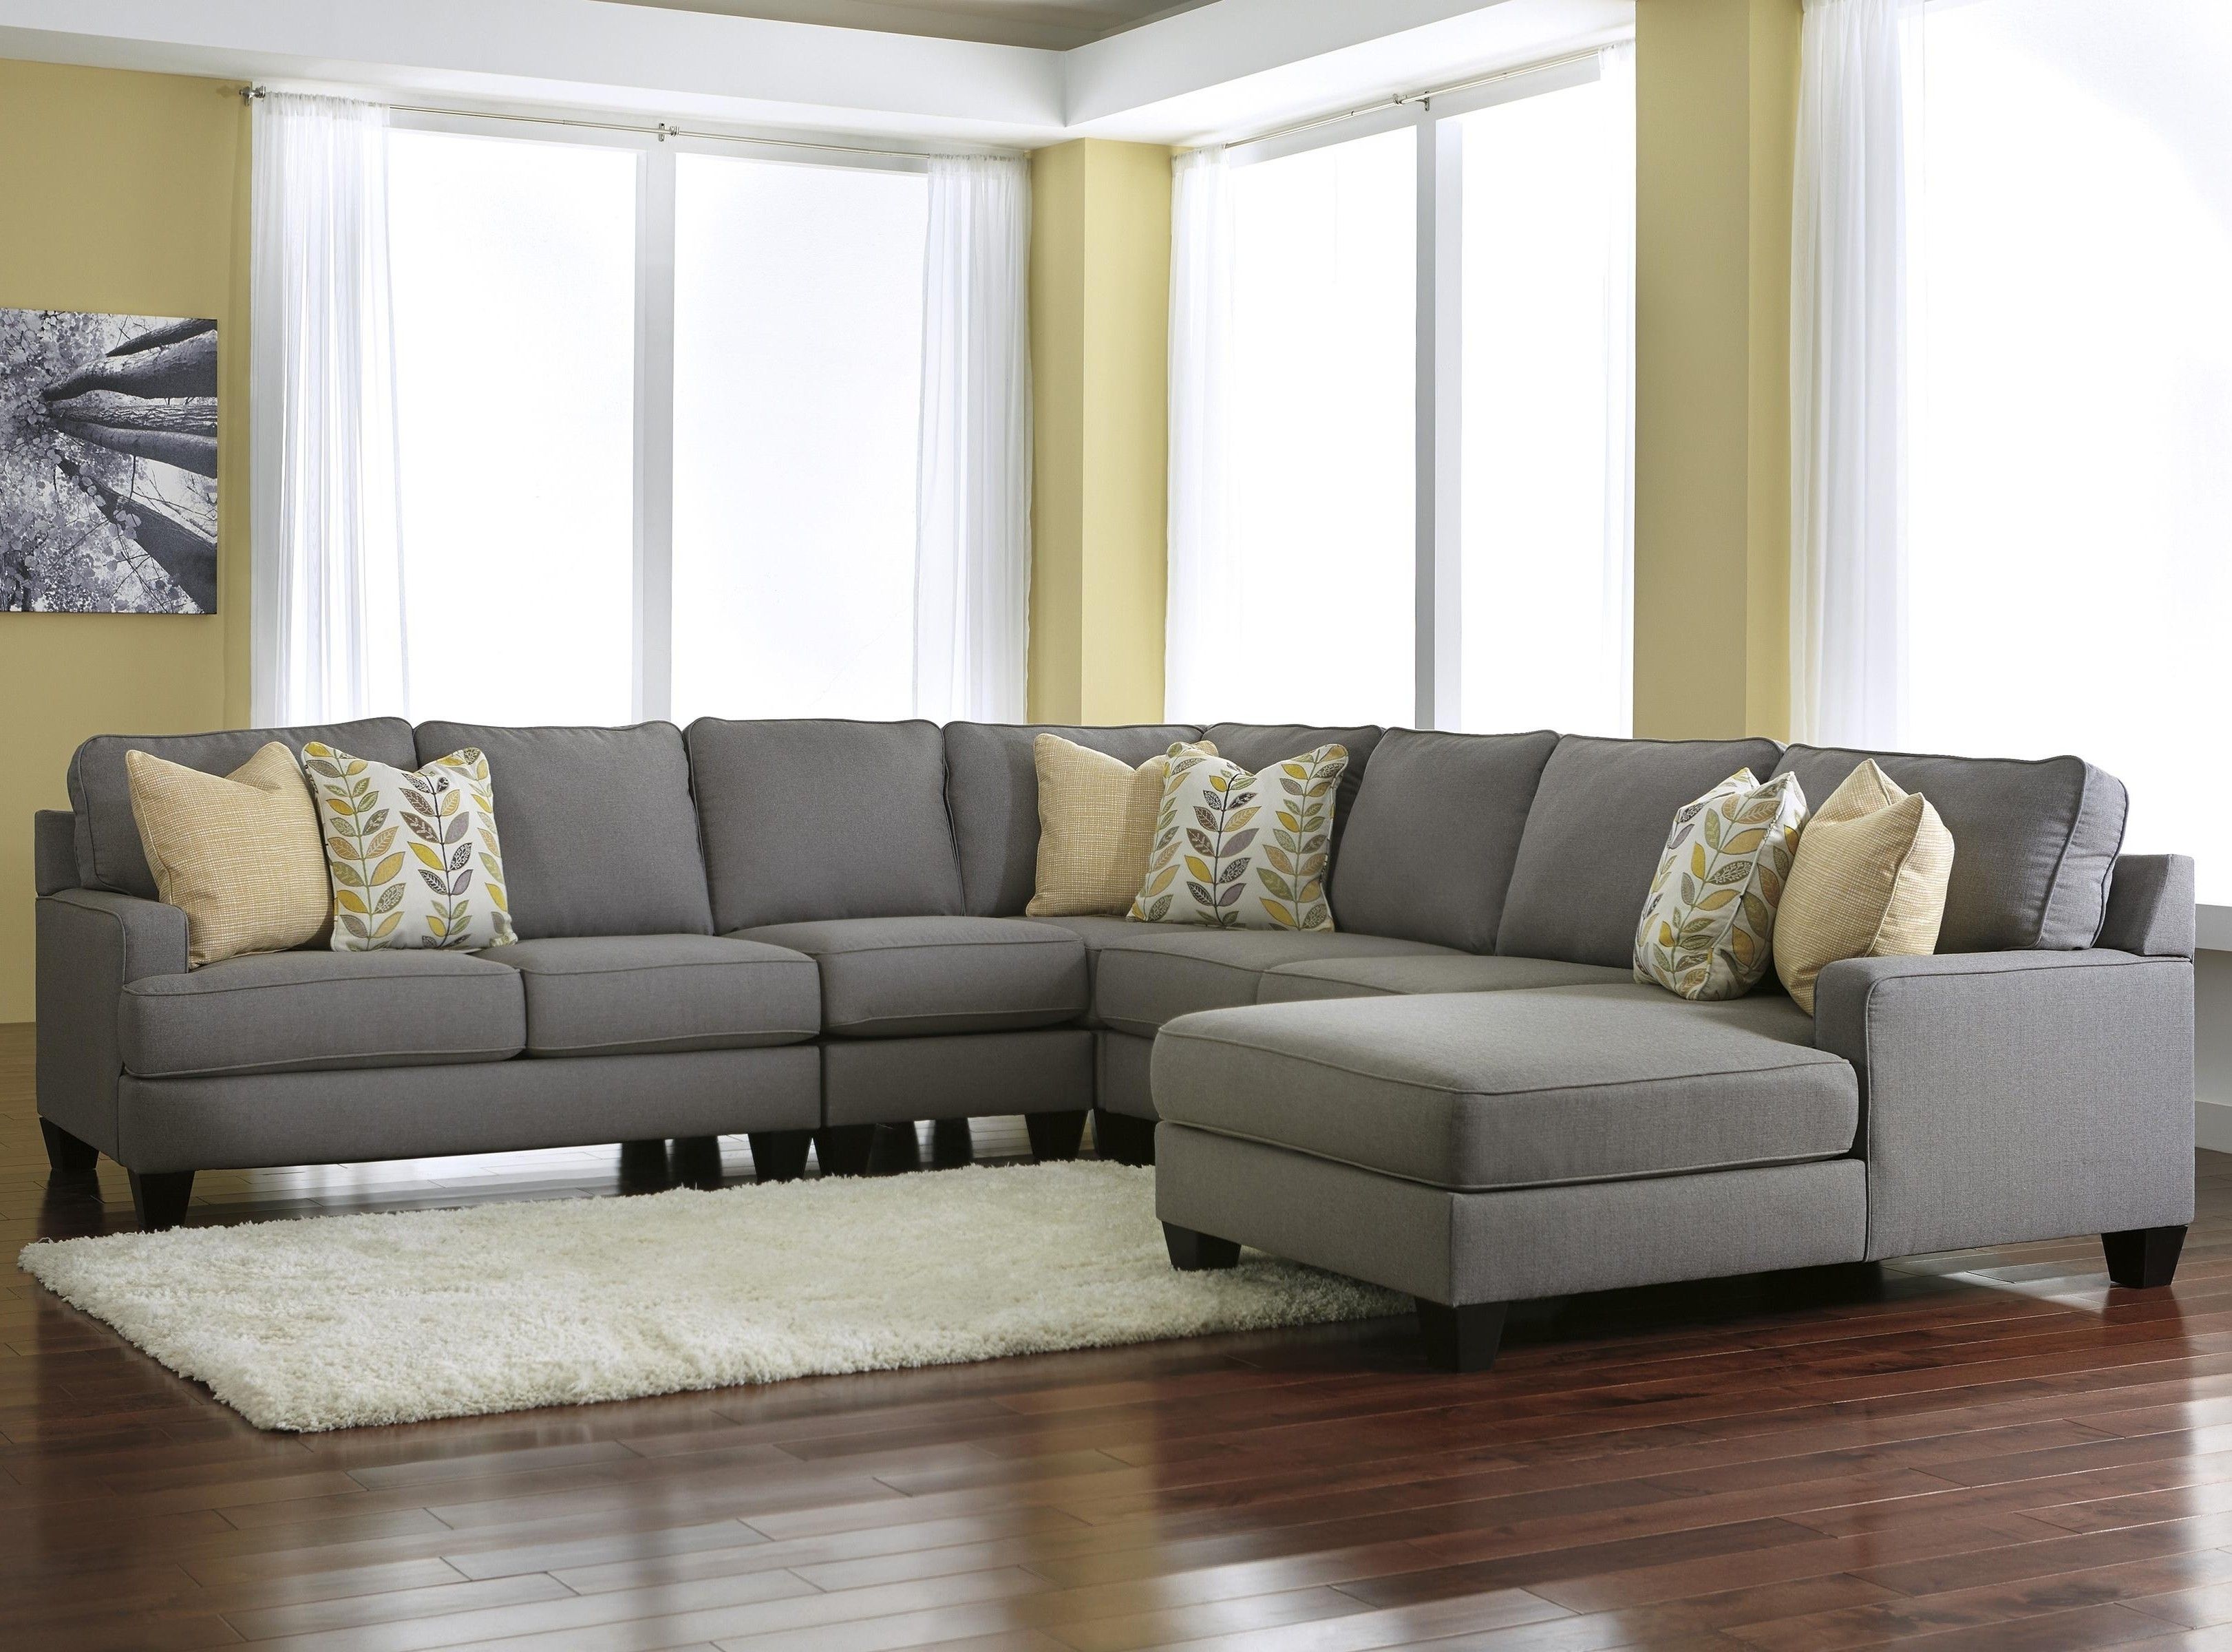 Unique Sectional Sofa Mn – Buildsimplehome Regarding St Cloud Mn Sectional Sofas (Photo 4 of 10)